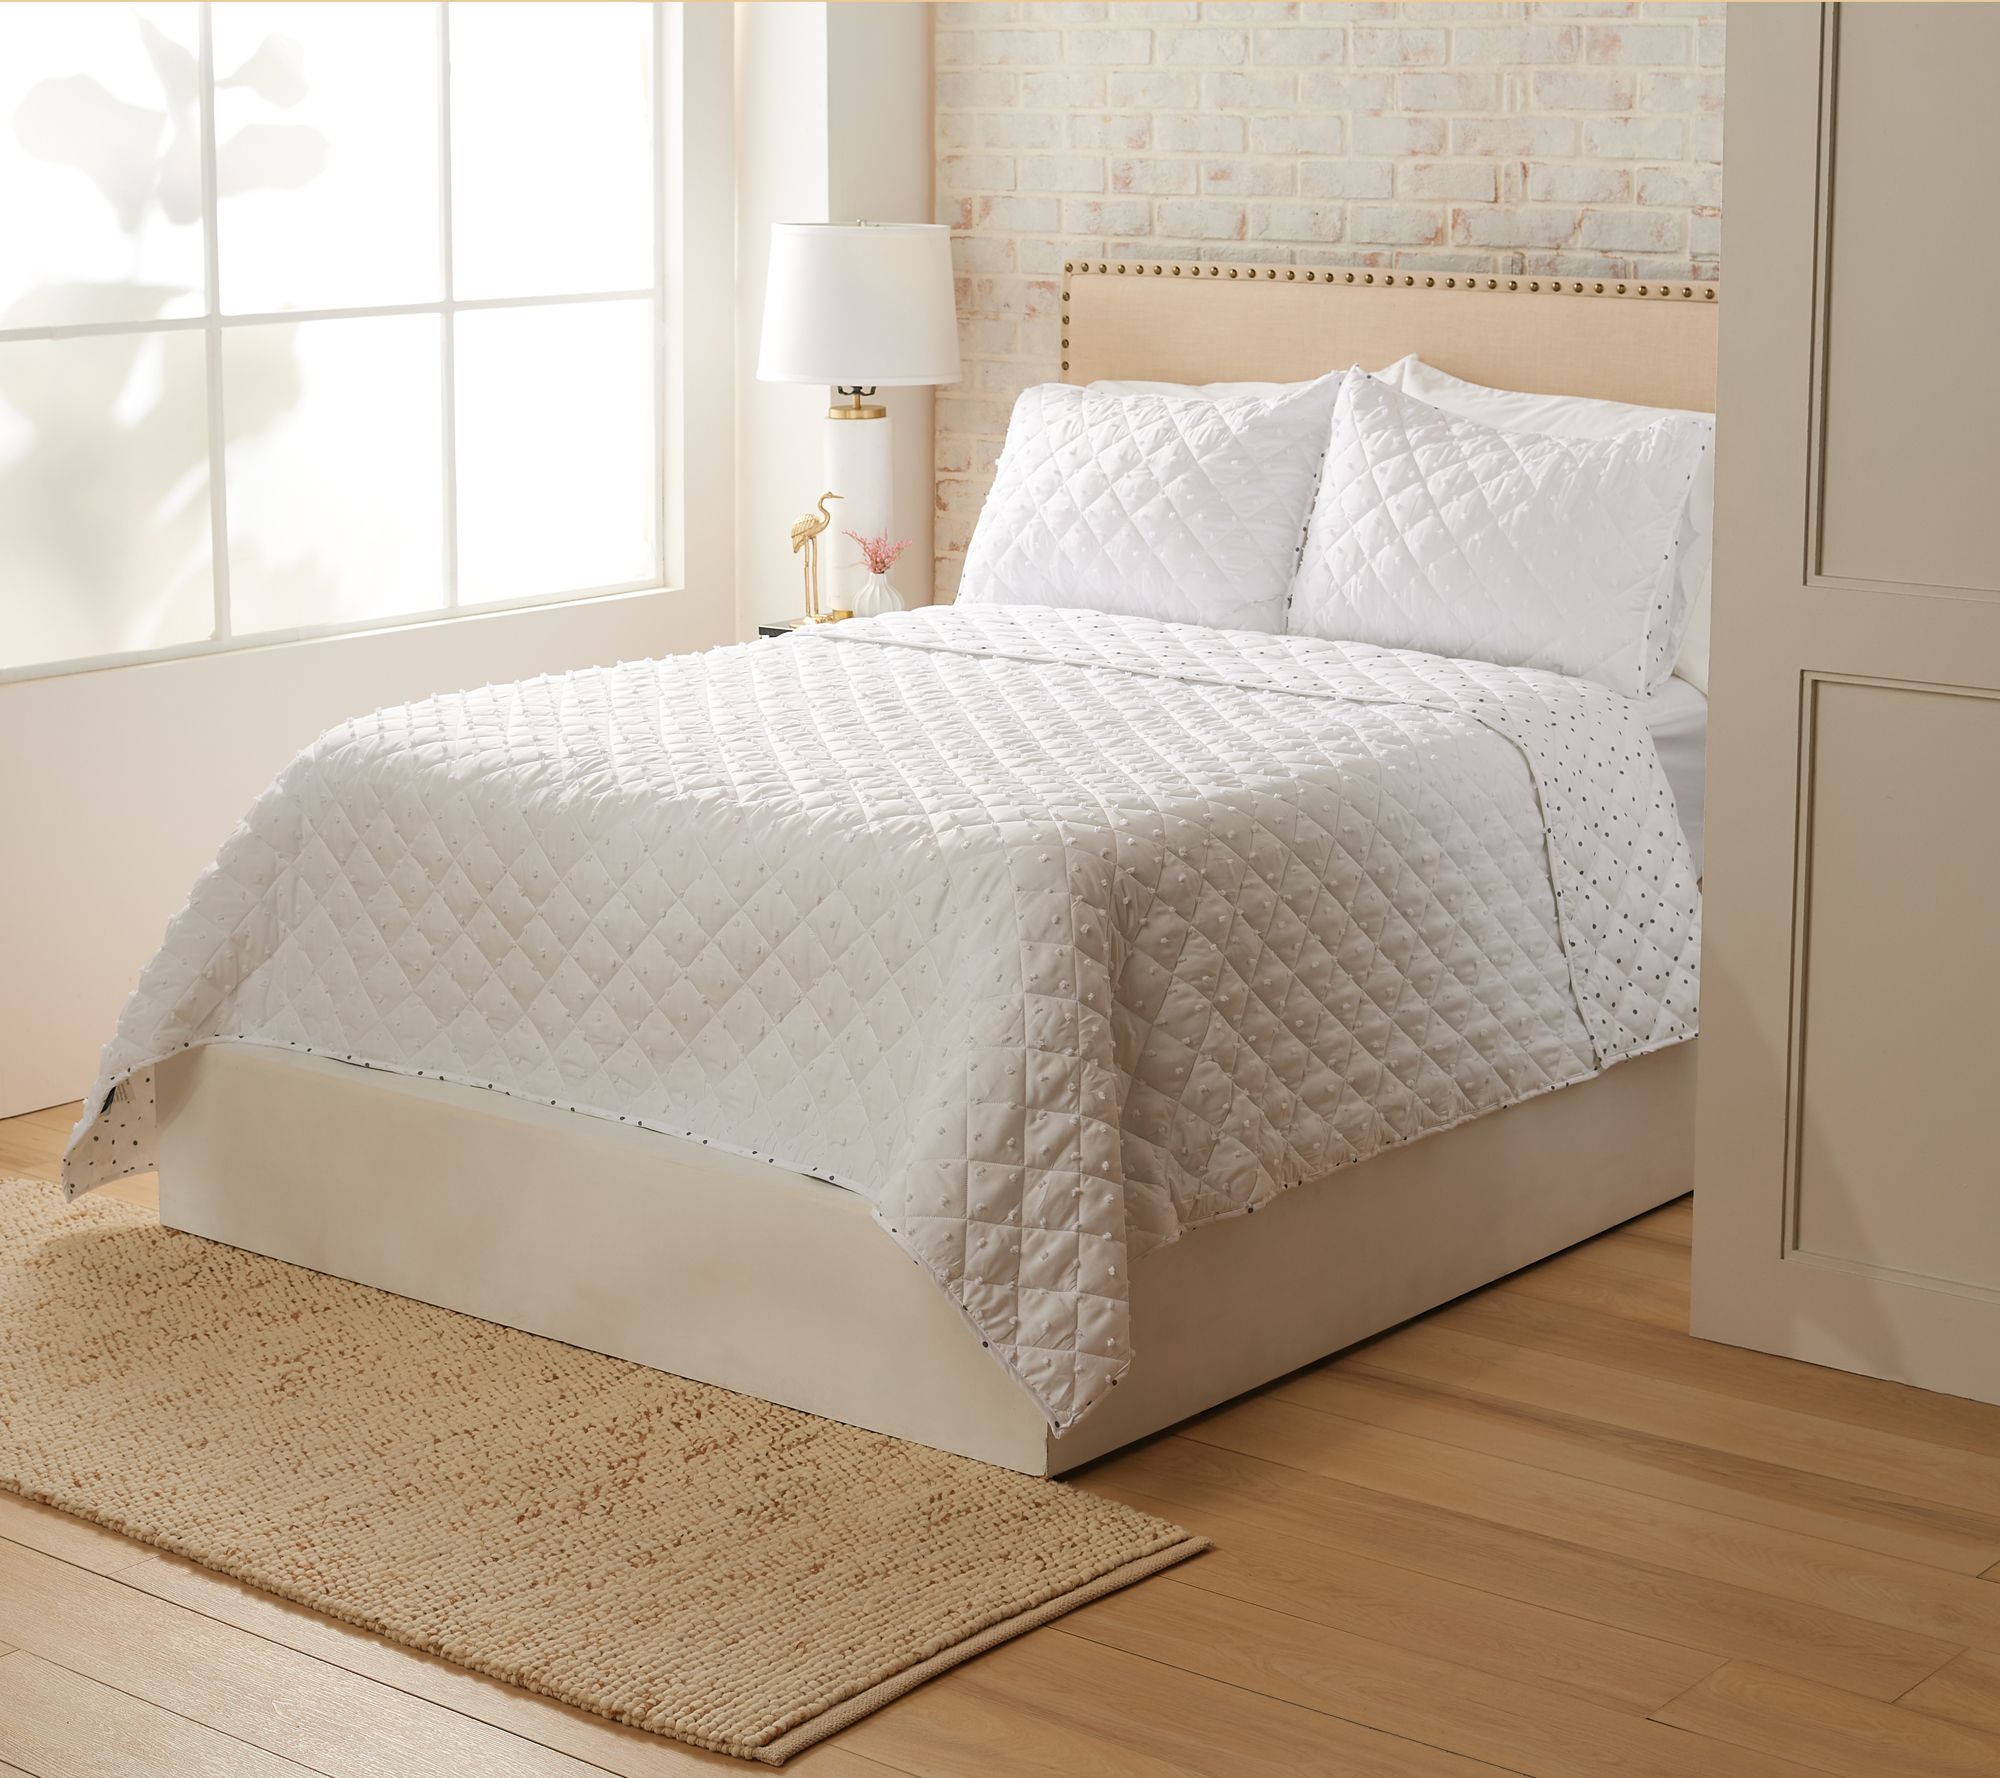 Sunbeam 54 x 20 Quilted Plush Heated Body Pillow on QVC 